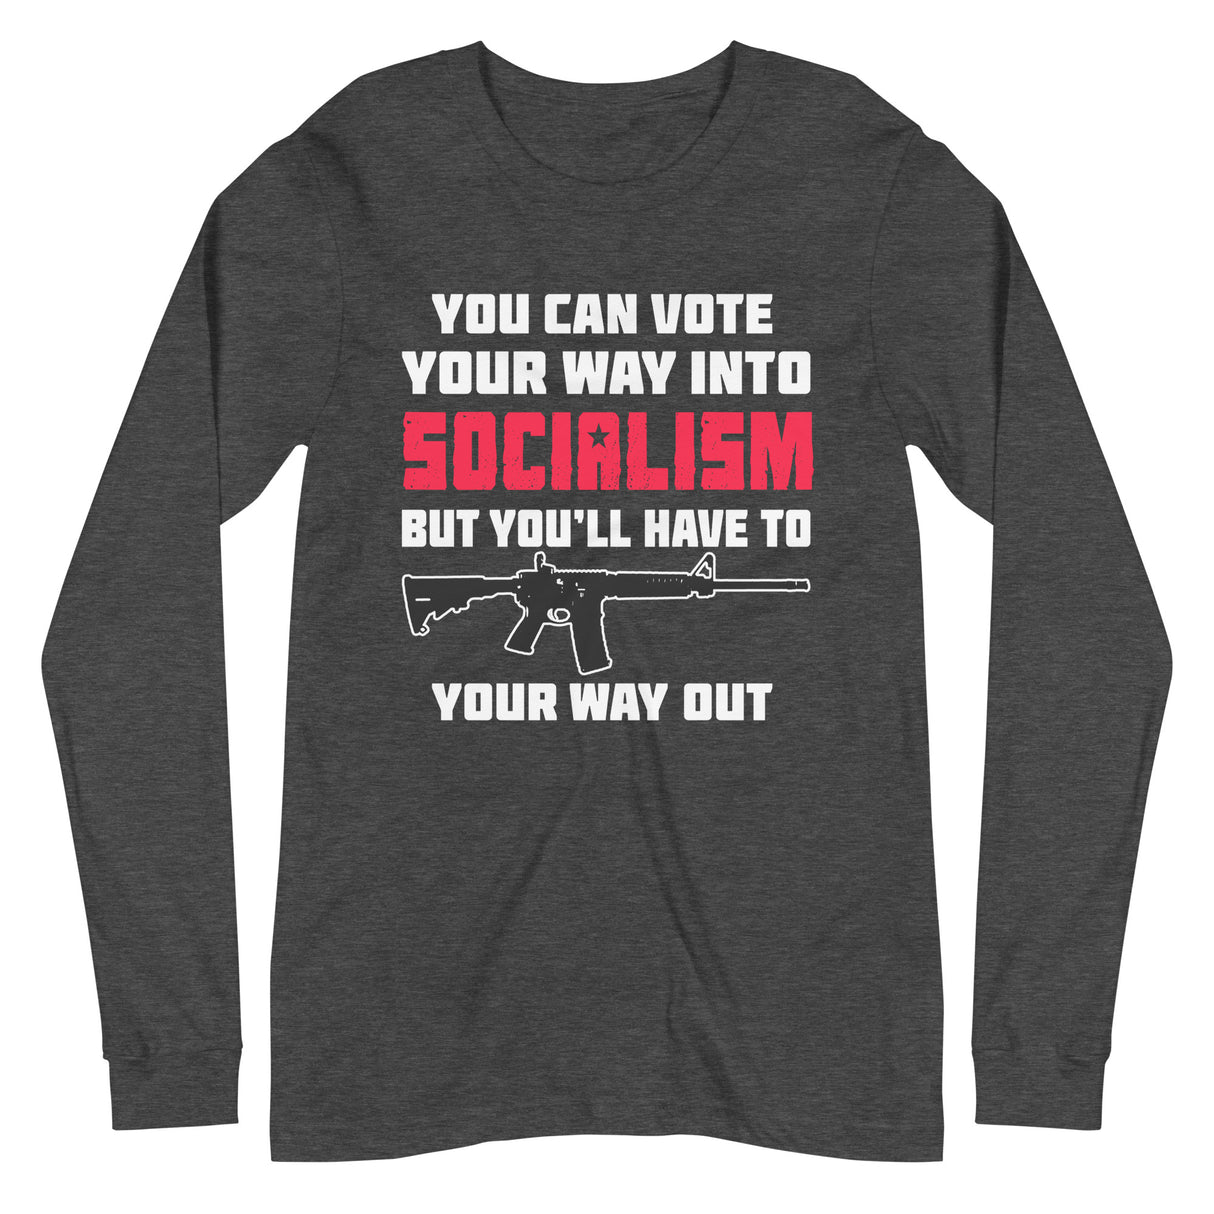 Shoot Your Way Out of Socialism Long Sleeve Shirt - Libertarian Country